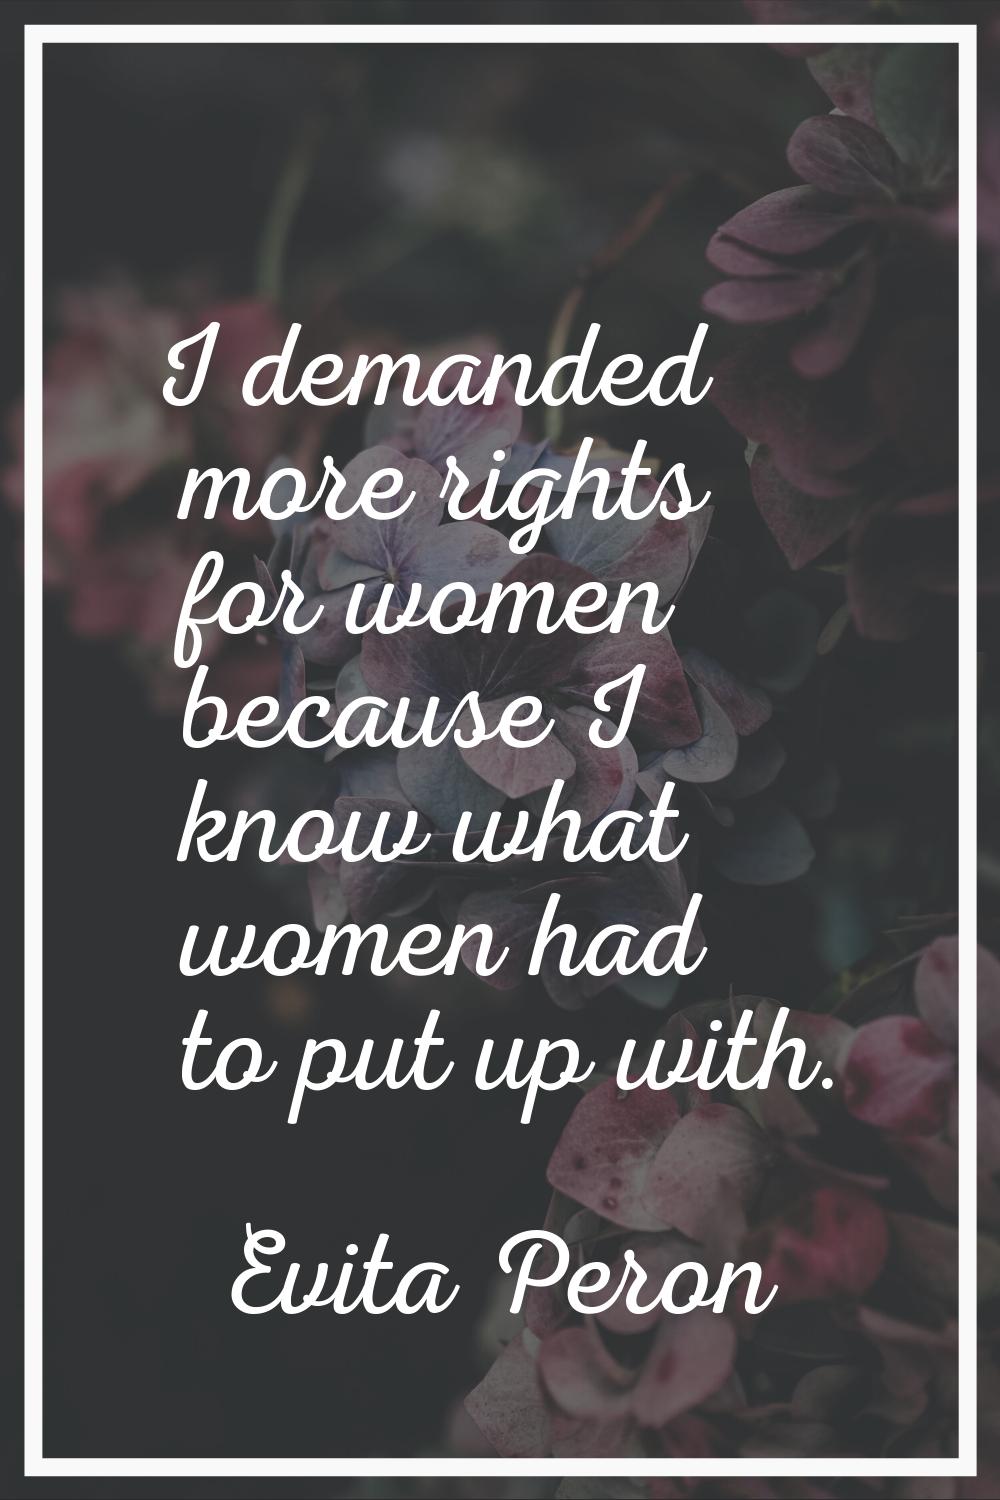 I demanded more rights for women because I know what women had to put up with.